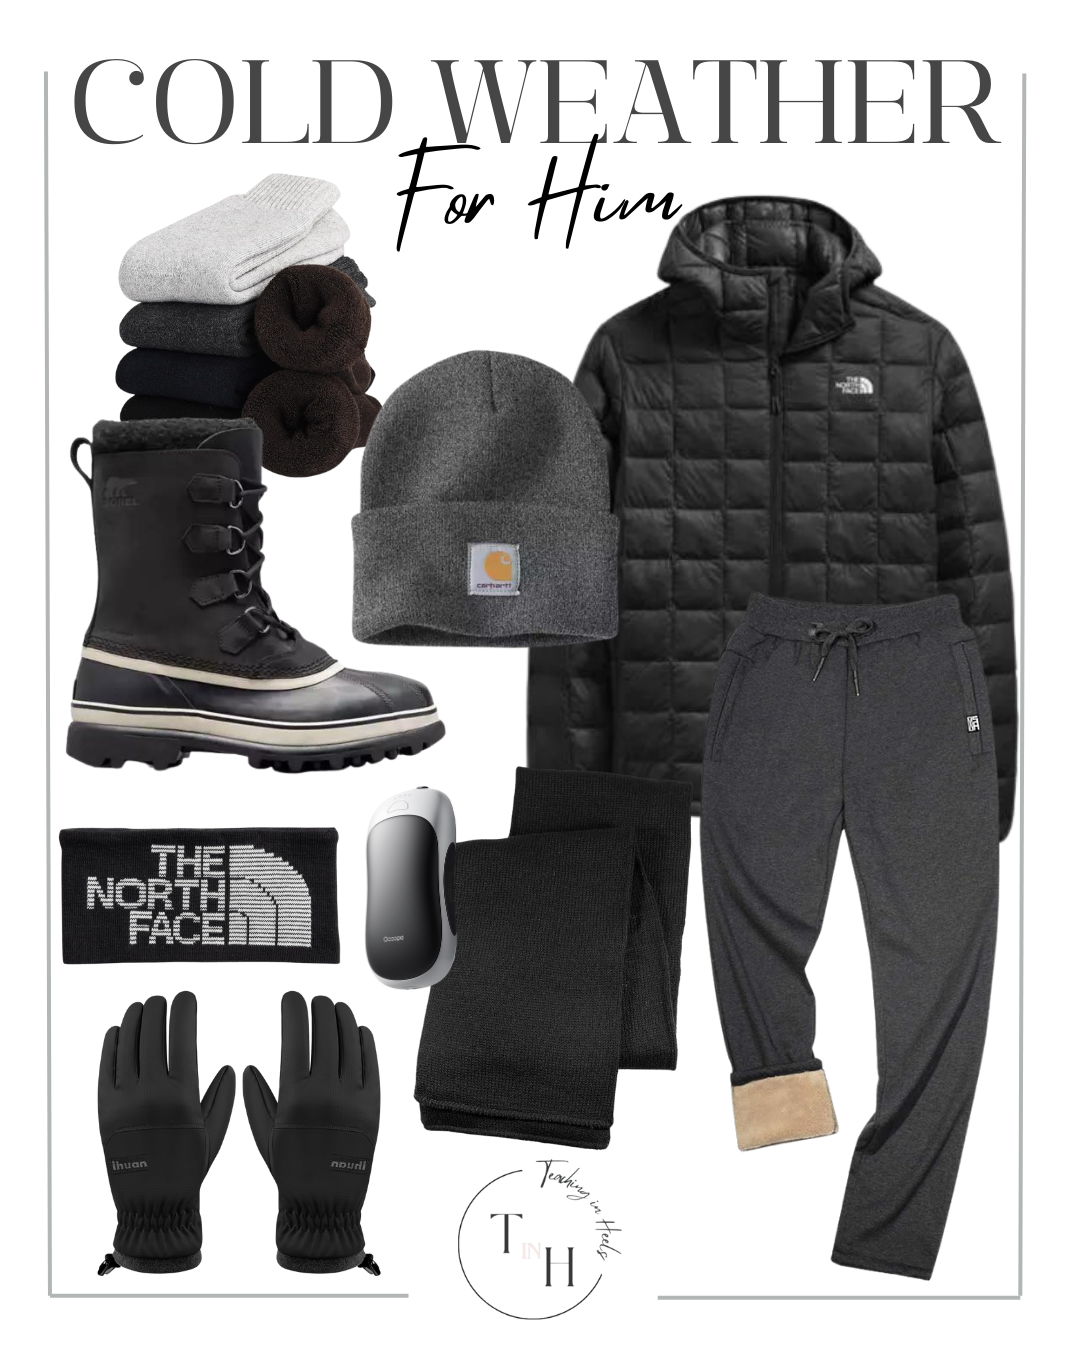 #winter #clothes #winterclothes #beanie #jacket #style #worthit #dollar #style #cold 